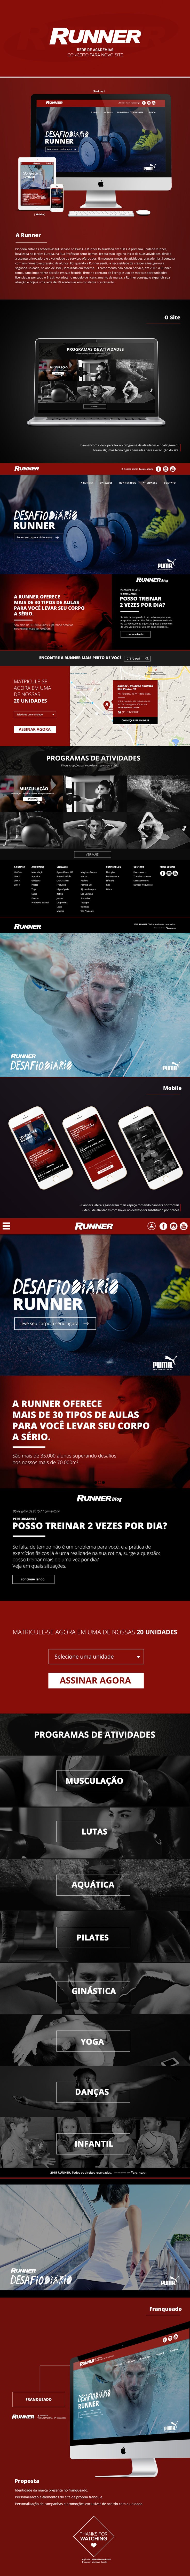 concept Website site HotSite Academias runner gym black and red